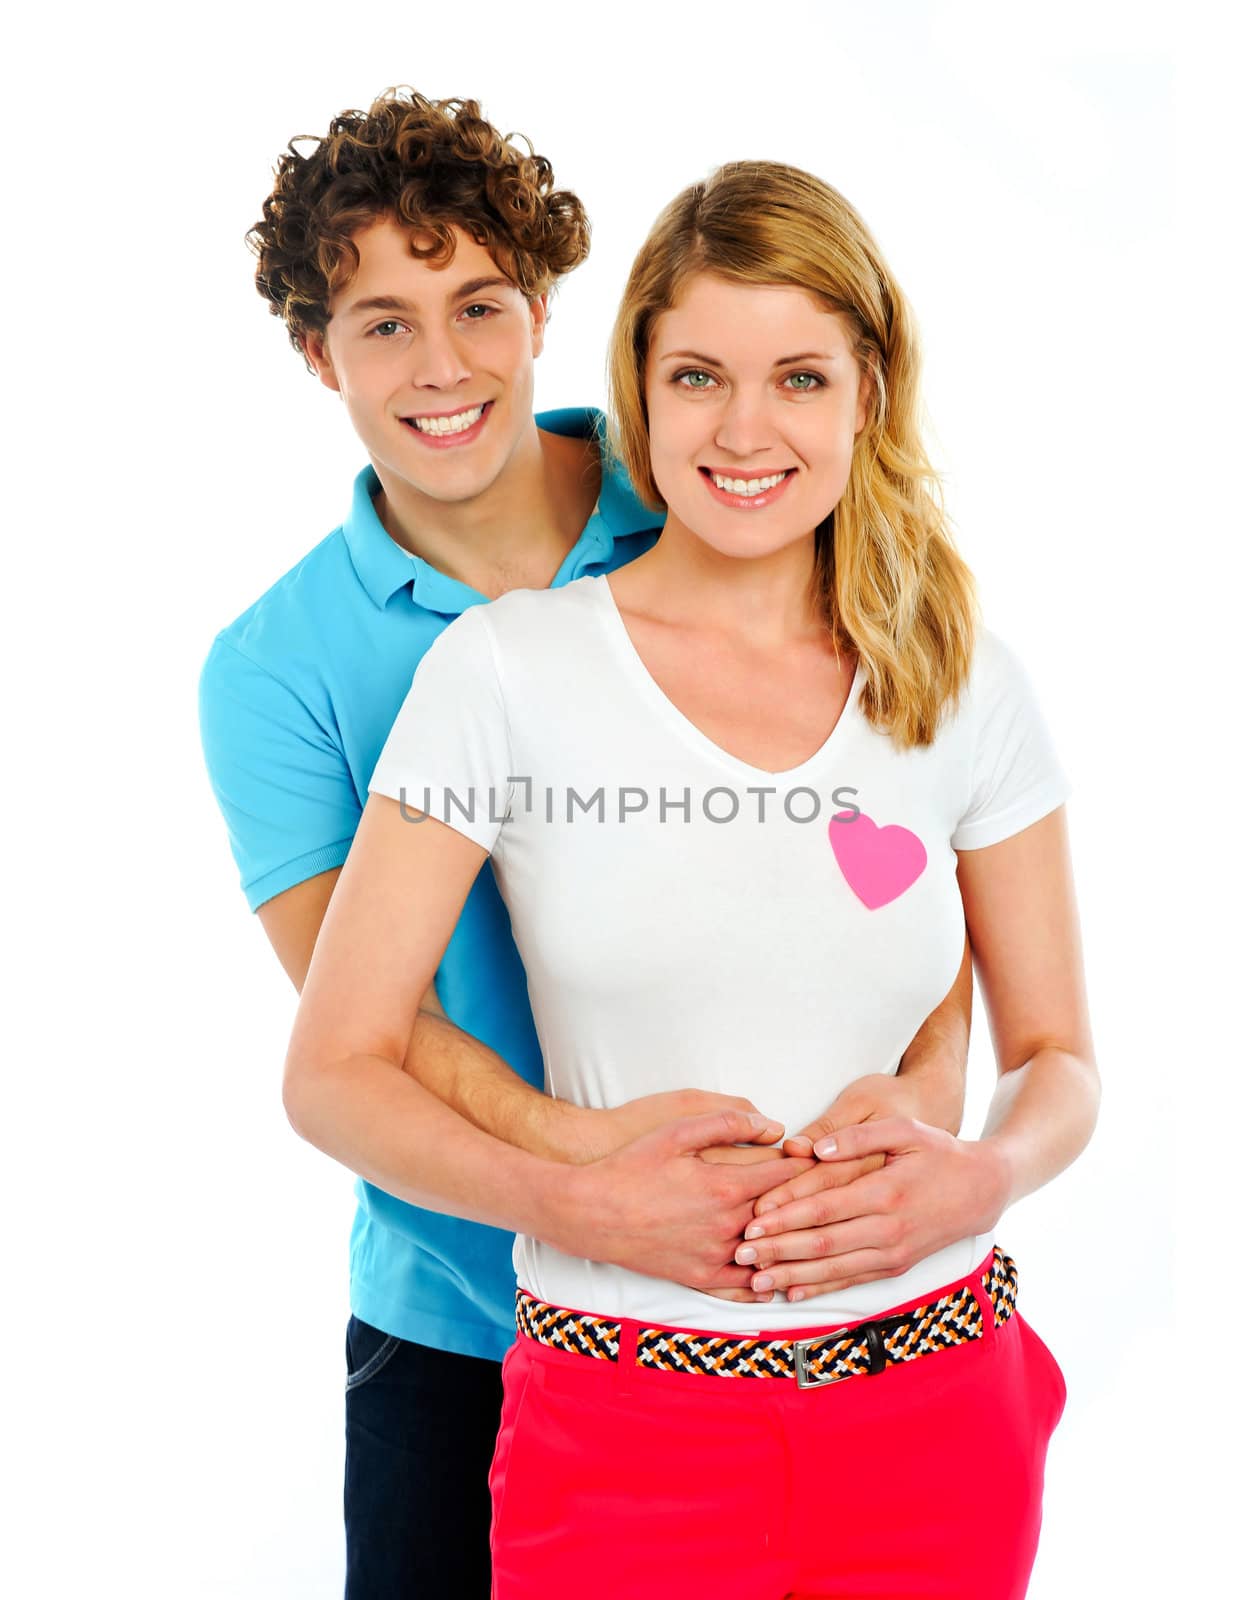 Smiling young couple standing together by stockyimages